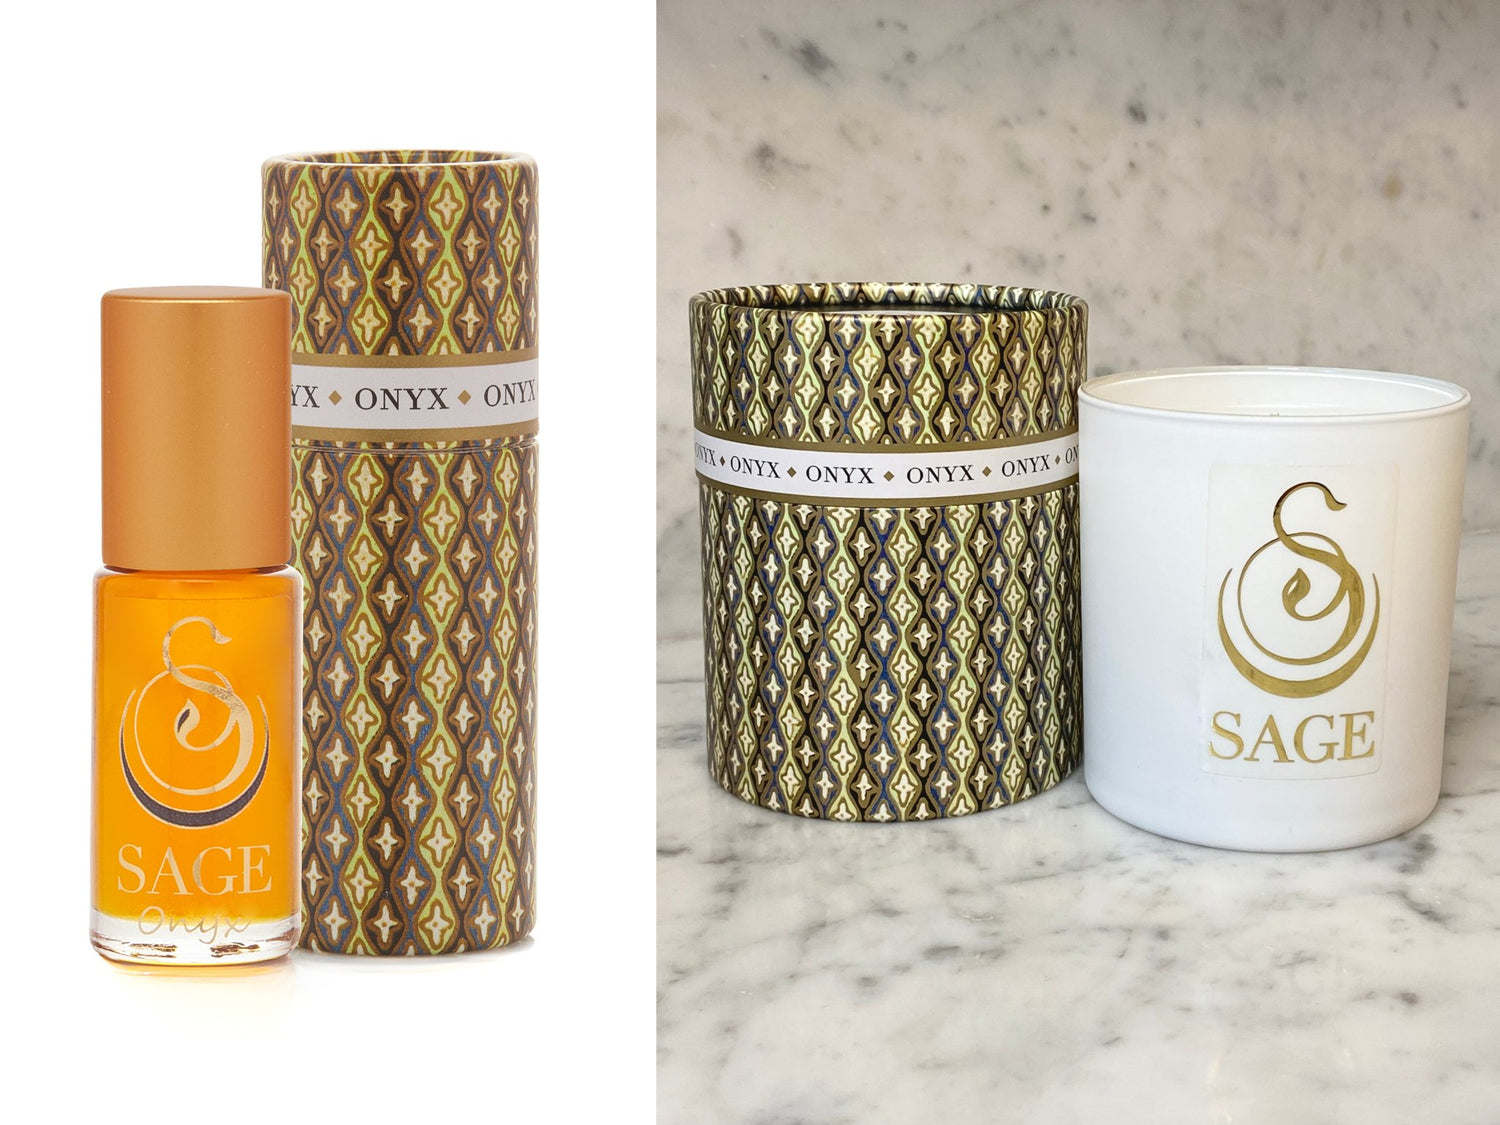 ESSENTIALS ~ ONYX Perfume Oil Concentrate Roll-On and Candle Gift Set by Sage - The Sage Lifestyle